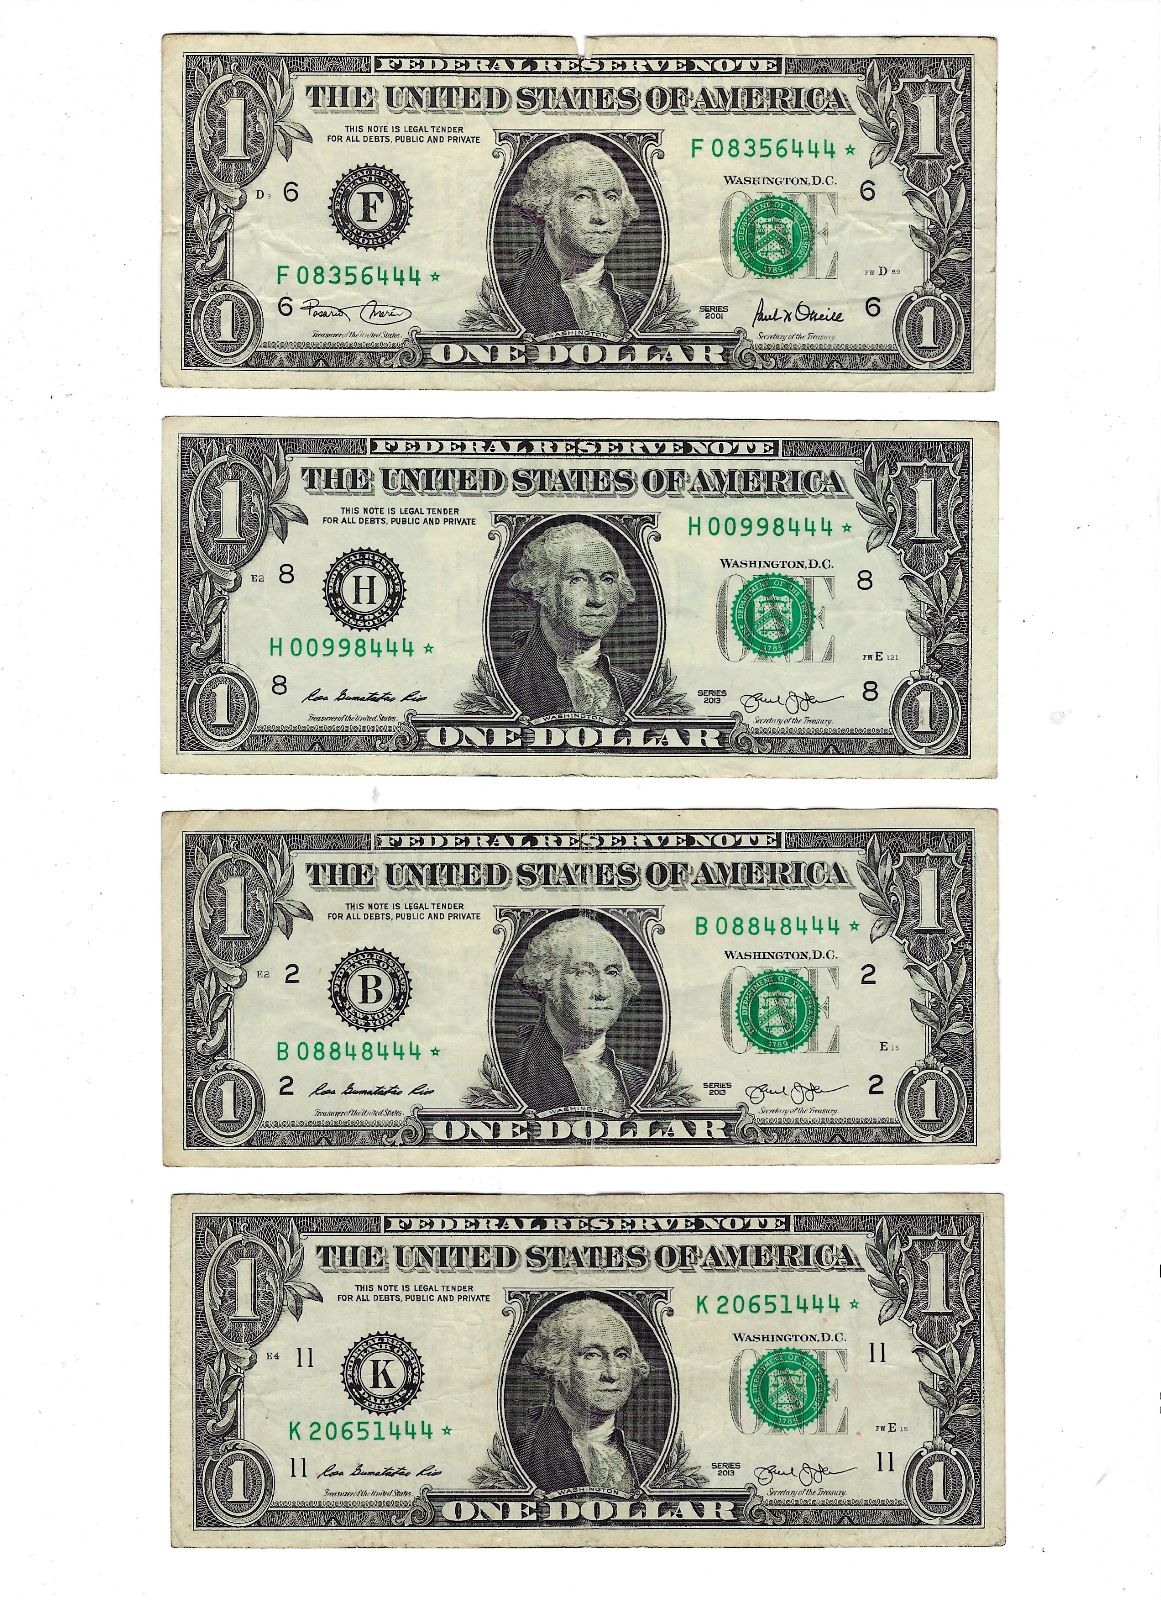 US $1 FRN Fancy Serial Number Ending Trial 444 x4 Different Districts. One Note Has A Tear & One With Lucky 888.F52